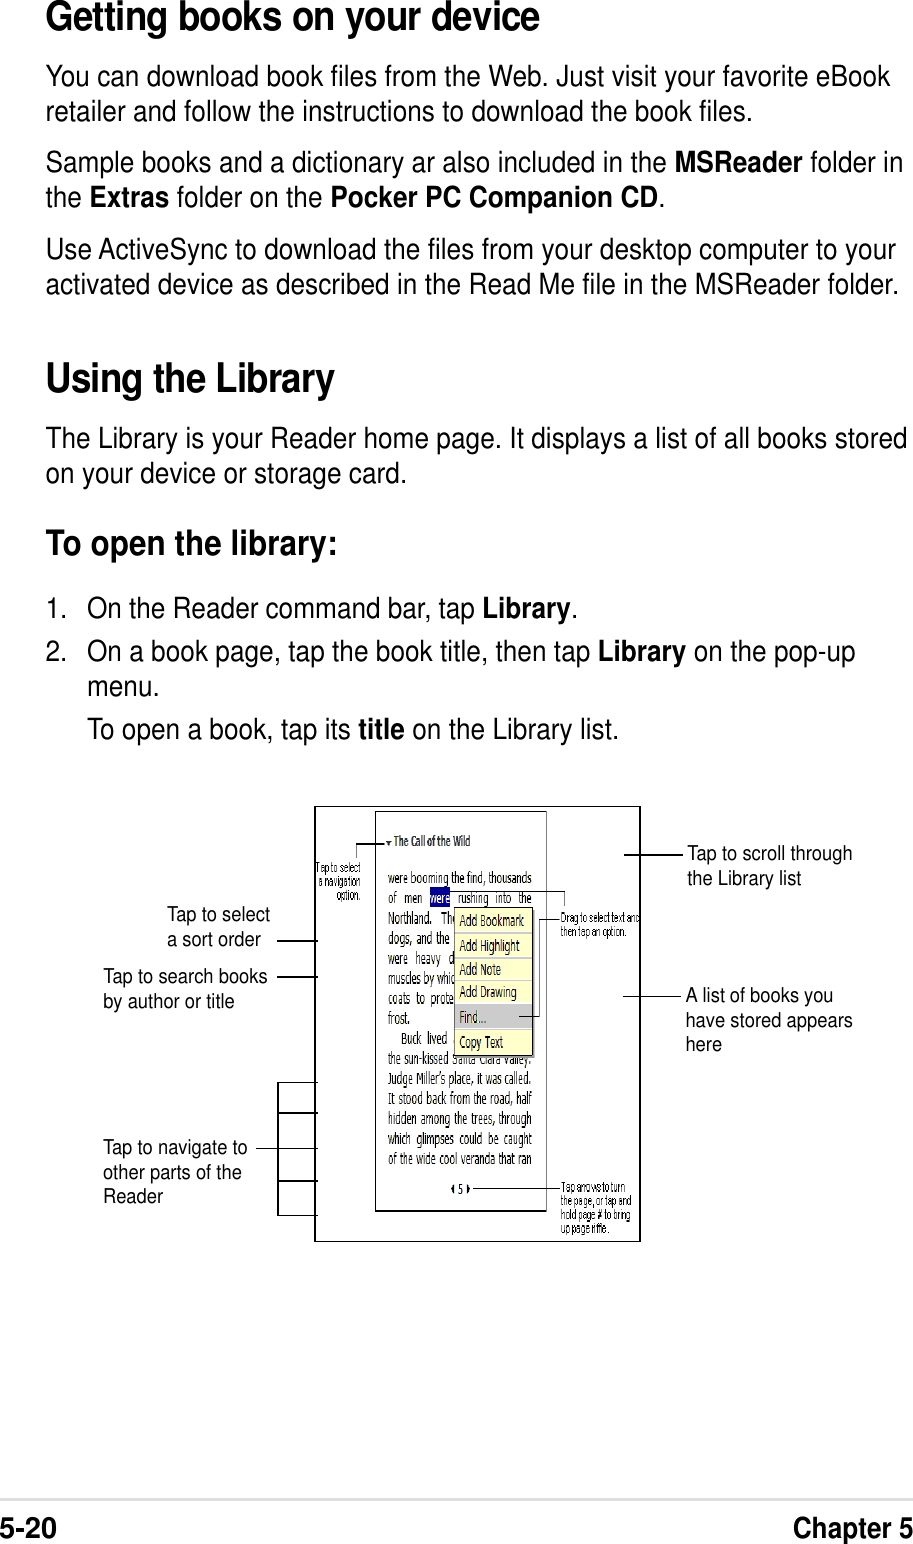 5-20Chapter 5Using the LibraryThe Library is your Reader home page. It displays a list of all books storedon your device or storage card.To open the library:1. On the Reader command bar, tap Library.2. On a book page, tap the book title, then tap Library on the pop-upmenu.To open a book, tap its title on the Library list.Tap to scroll throughthe Library listTap to selecta sort orderTap to search booksby author or titleTap to navigate toother parts of theReaderA list of books youhave stored appearshereGetting books on your deviceYou can download book files from the Web. Just visit your favorite eBookretailer and follow the instructions to download the book files.Sample books and a dictionary ar also included in the MSReader folder inthe Extras folder on the Pocker PC Companion CD.Use ActiveSync to download the files from your desktop computer to youractivated device as described in the Read Me file in the MSReader folder.